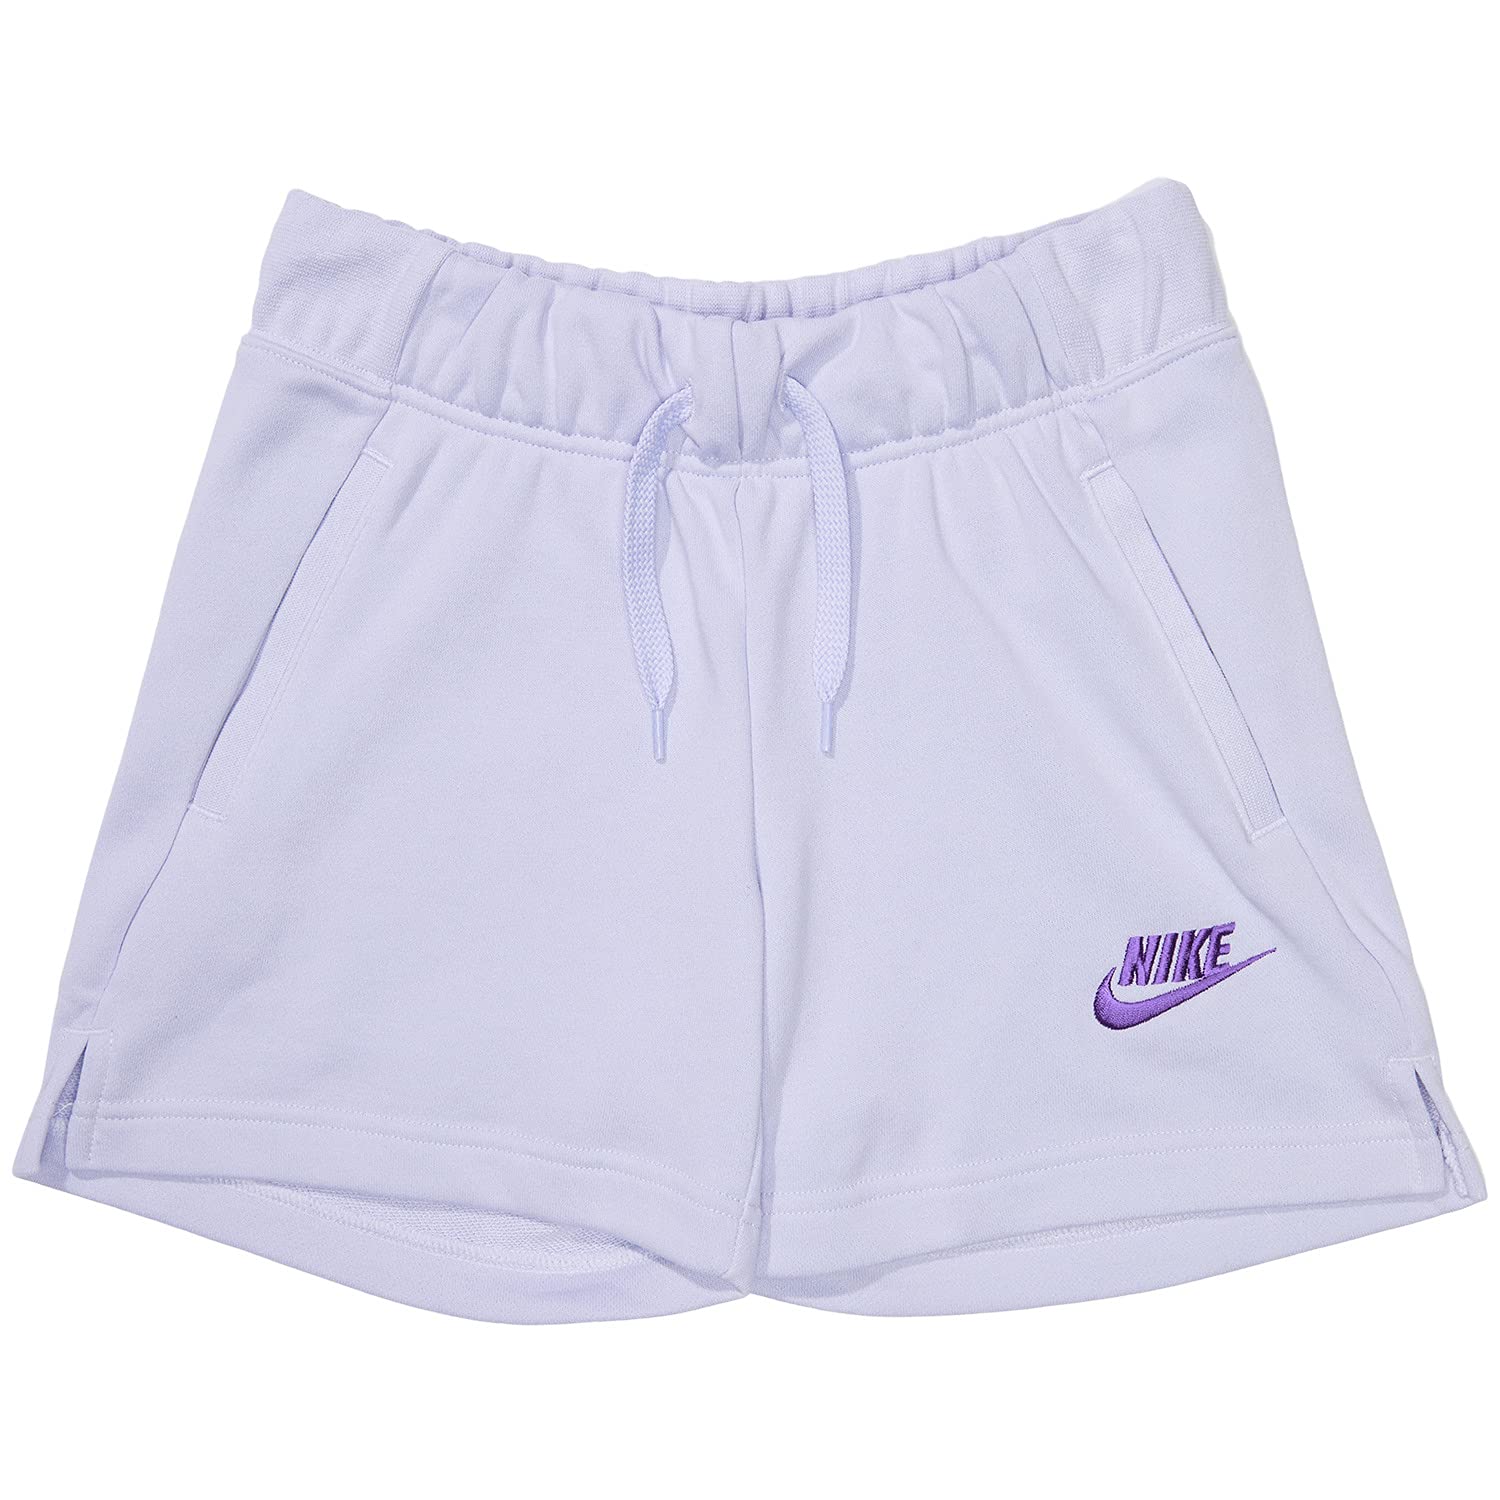 Image 1 of NSW Club French Terry Shorts (Little Kids/Big Kids)